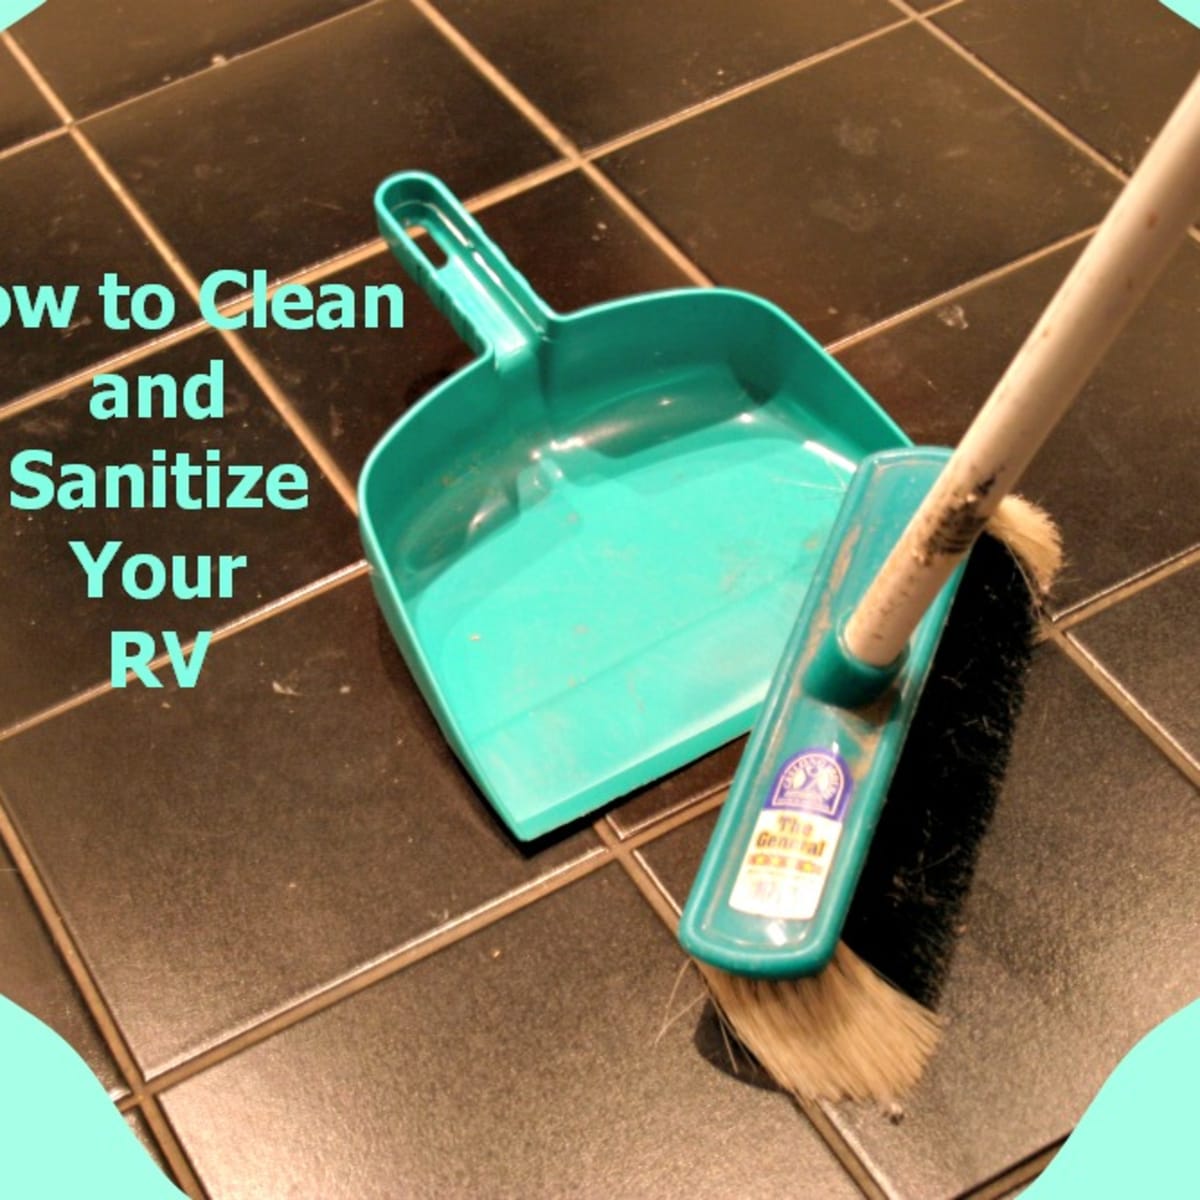 Sanitize the Interior of Your RV